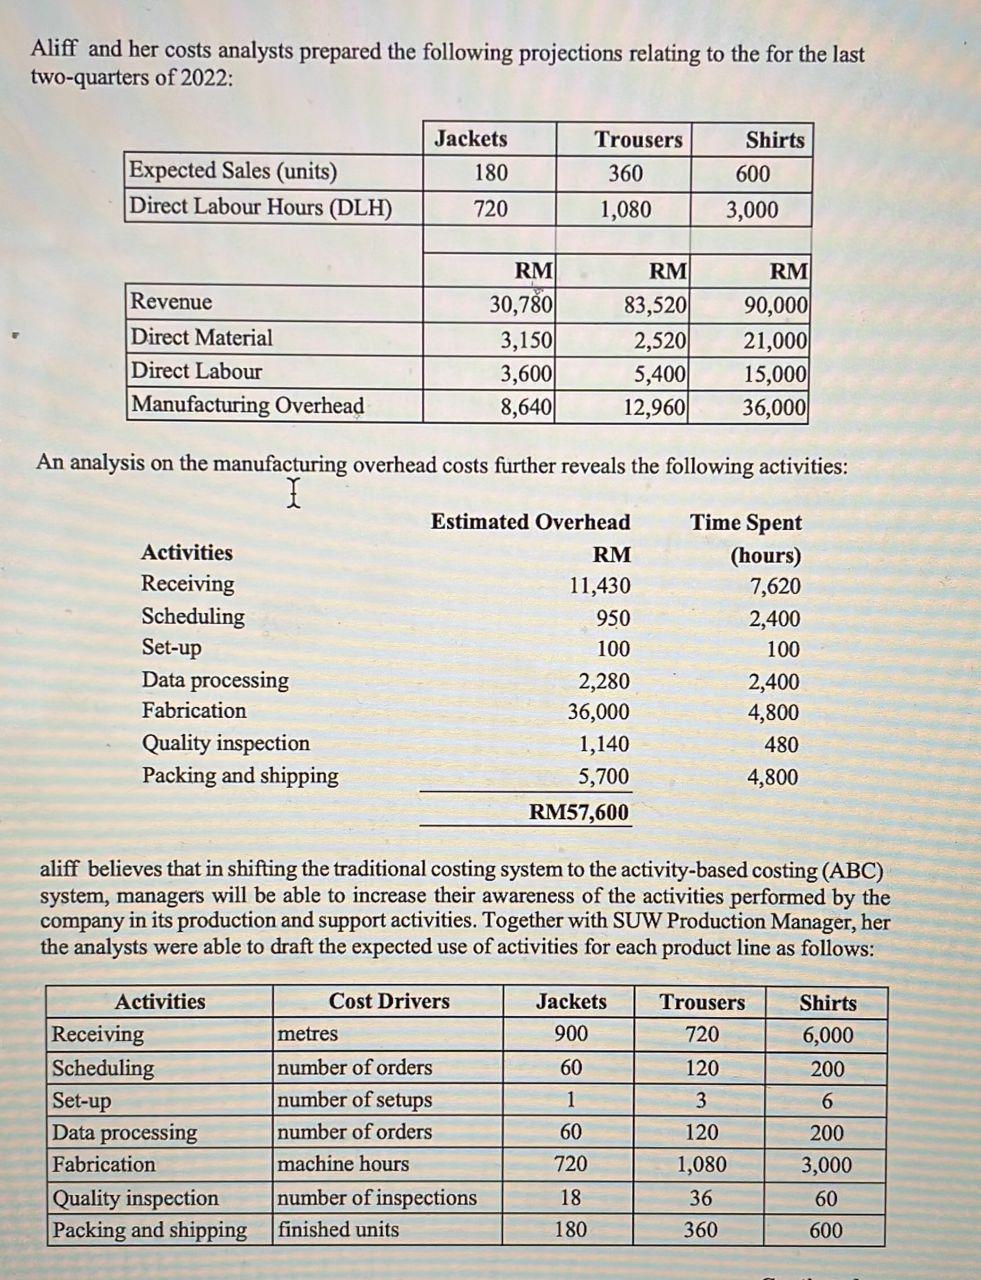 Aliff and her costs analysts prepared the following projections relating to the for the lasttwo-quarters of 2022:Jackets18